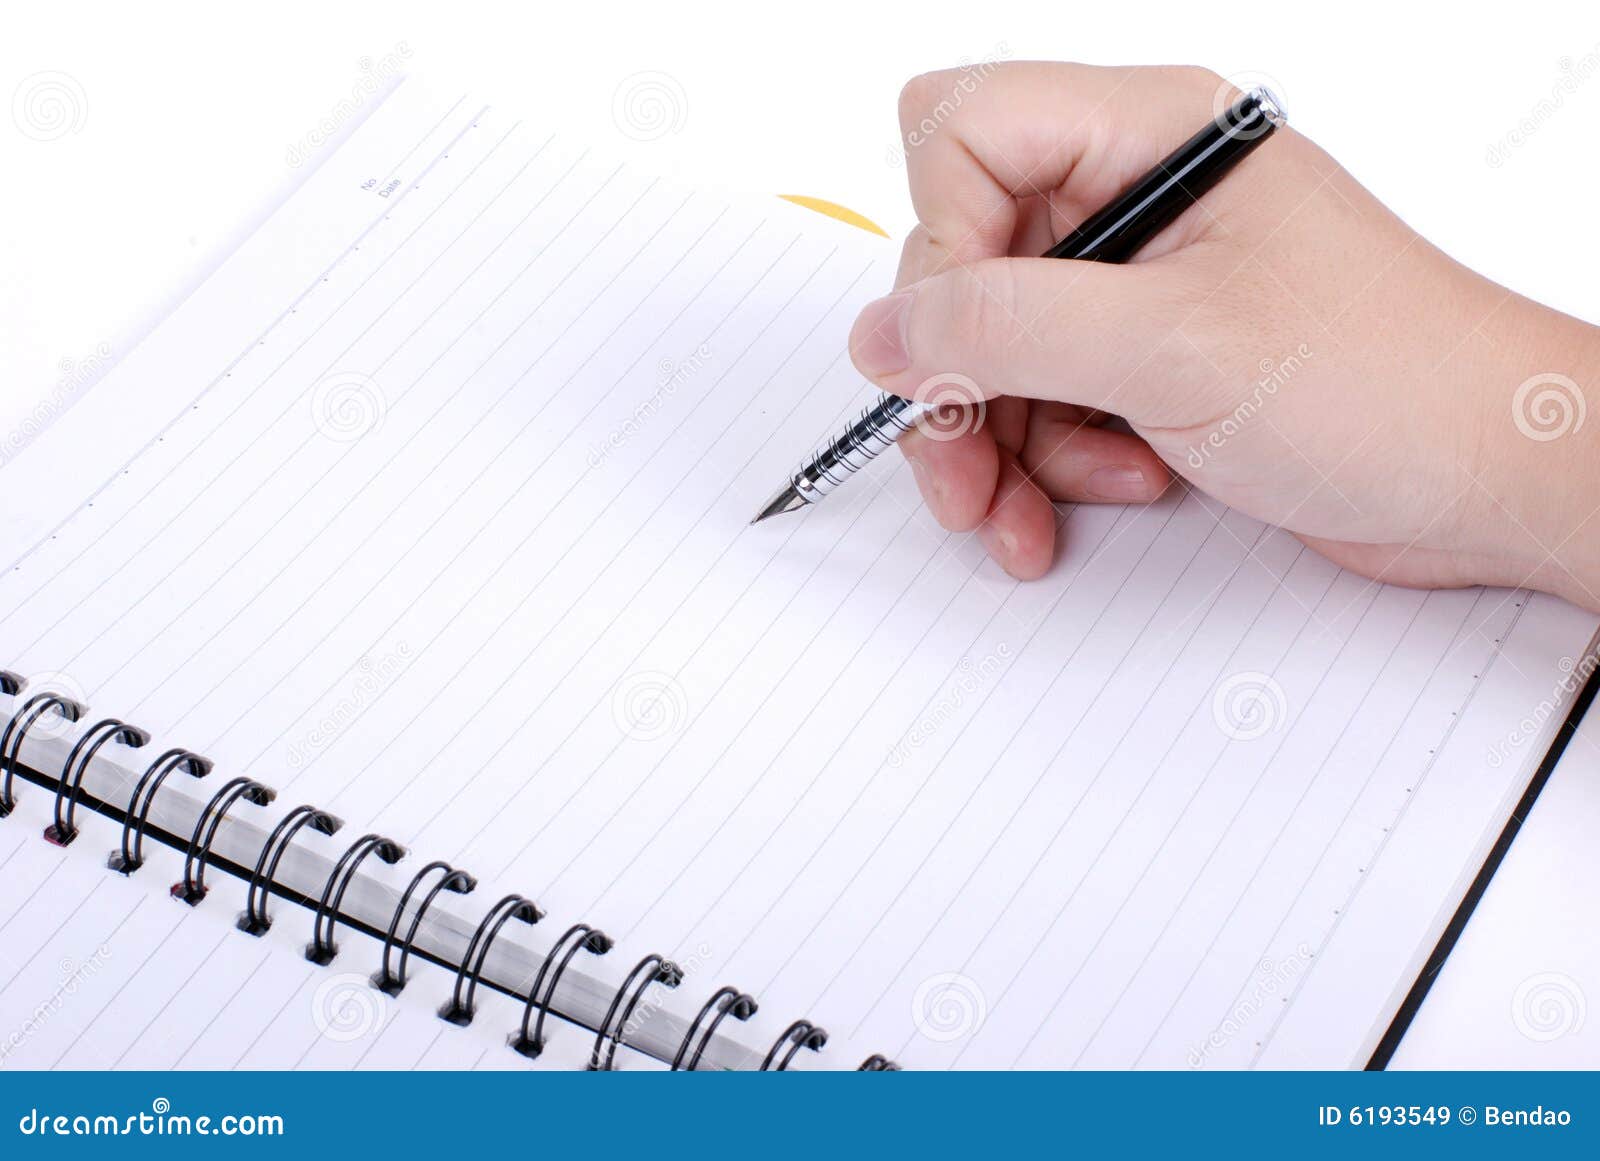 Hand write on a note book stock image. Image of sheet - 12